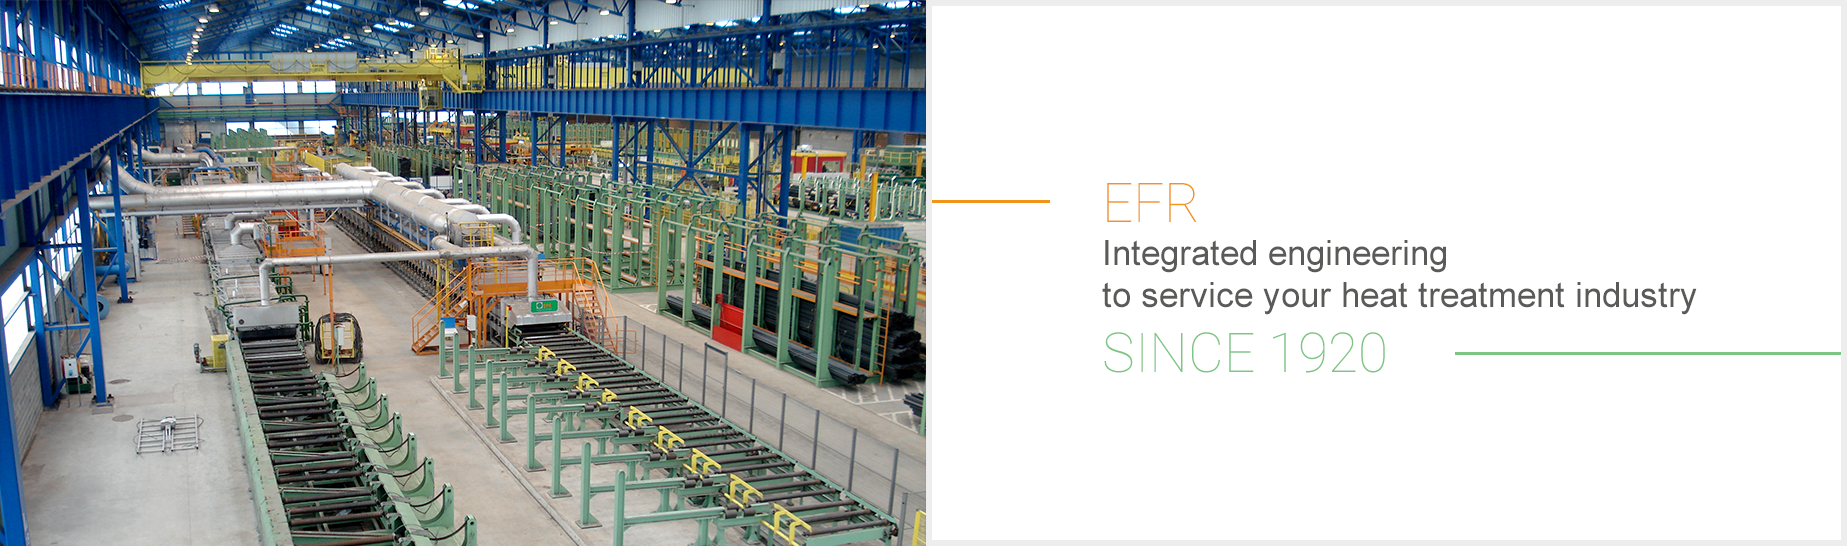 Integrated engineering to service your heat treatment industry